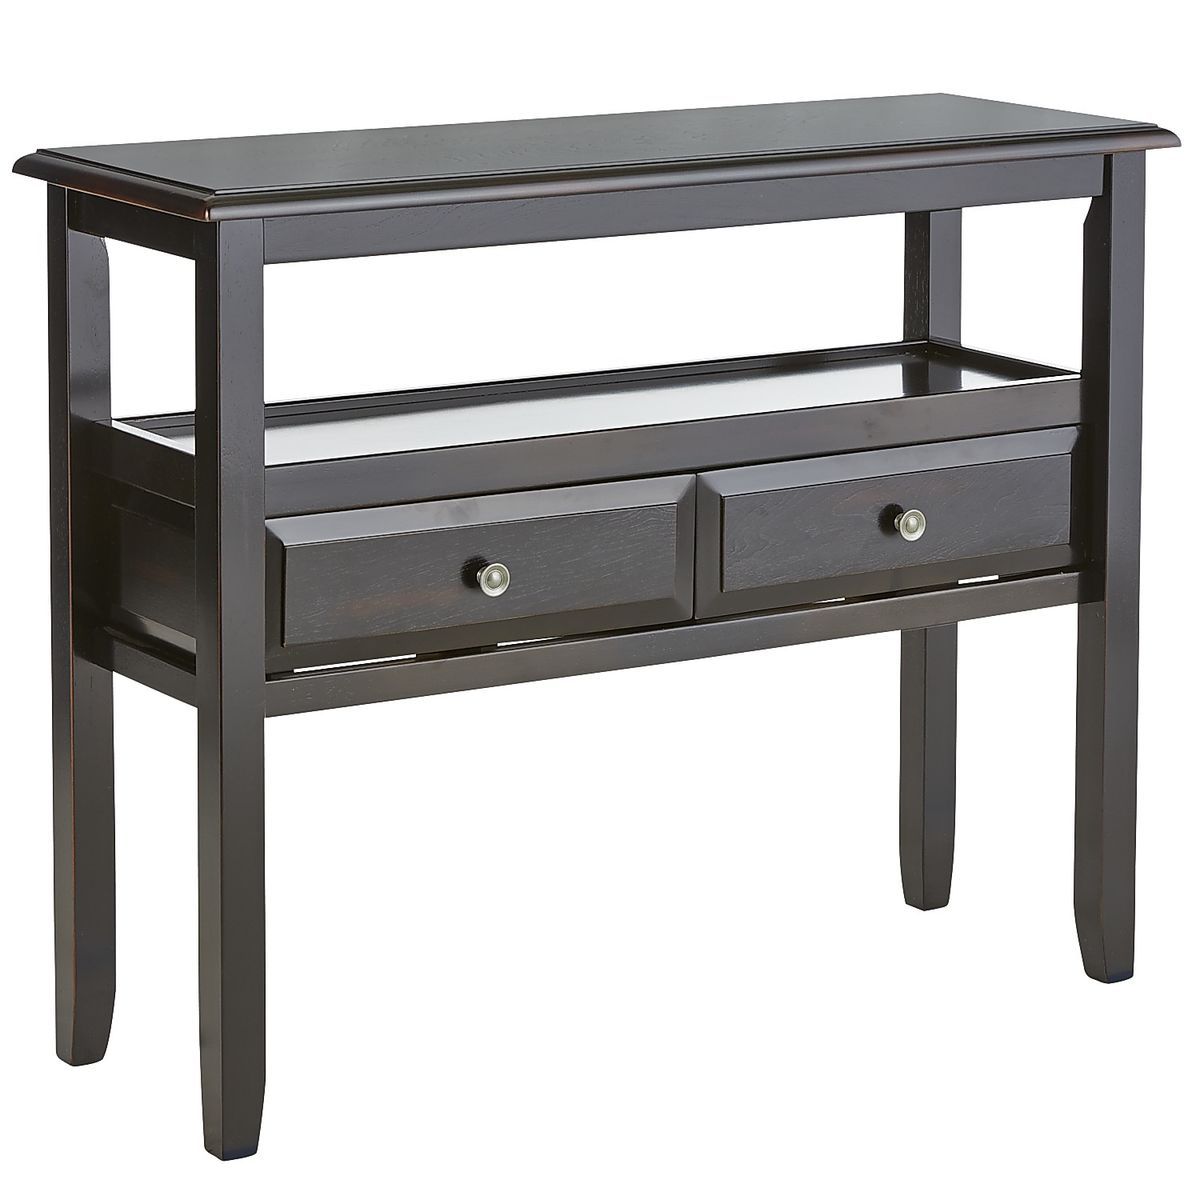 Black Console Table Small 3034286 1 | Costa Rican Furniture Throughout Antique White Black Console Tables (View 19 of 20)